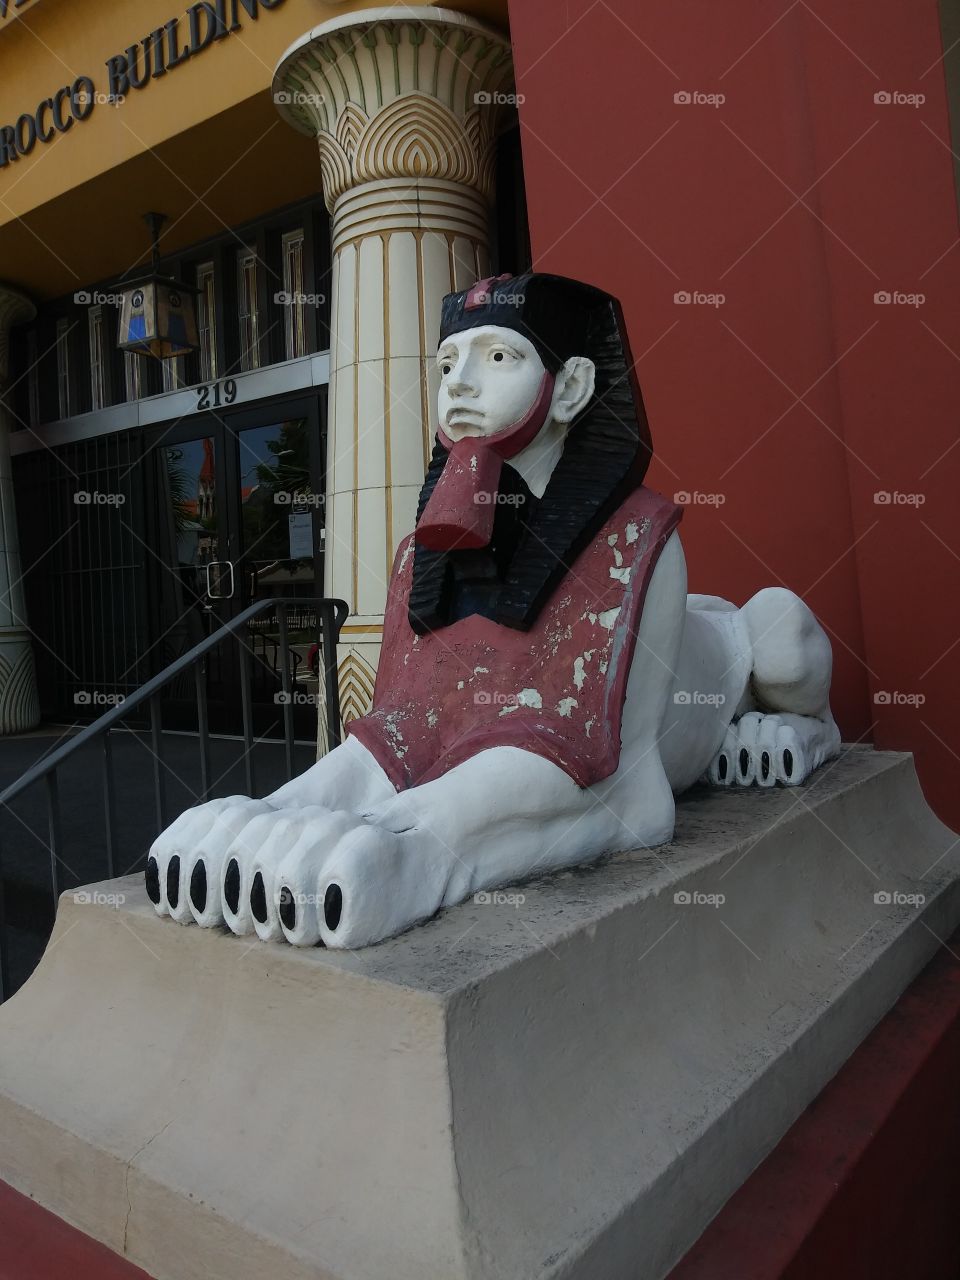 The Morocco Building. Downtown Jacksonville FL. Egyptian Sphynx guarding the entrance